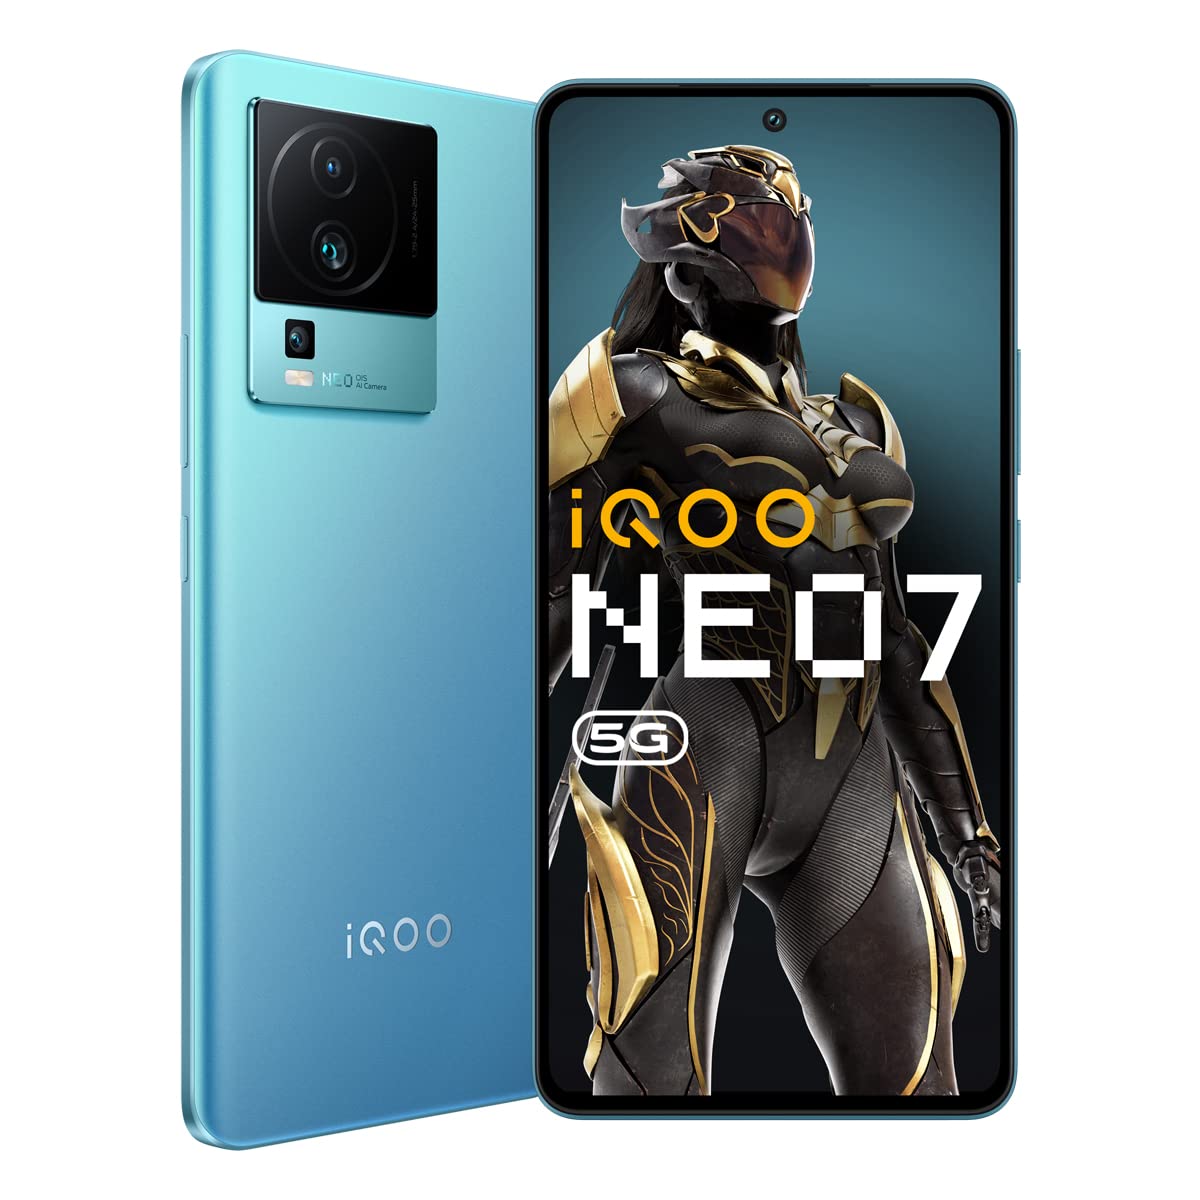 iQOO Neo 7 5G (Frost Blue, 8GB RAM, 128GB Storage) | MediaTek Dimensity 8200, only 4nm Processor in The Segment | 50% Charge in 10 mins | Motion Control & 90 FPS Gaming